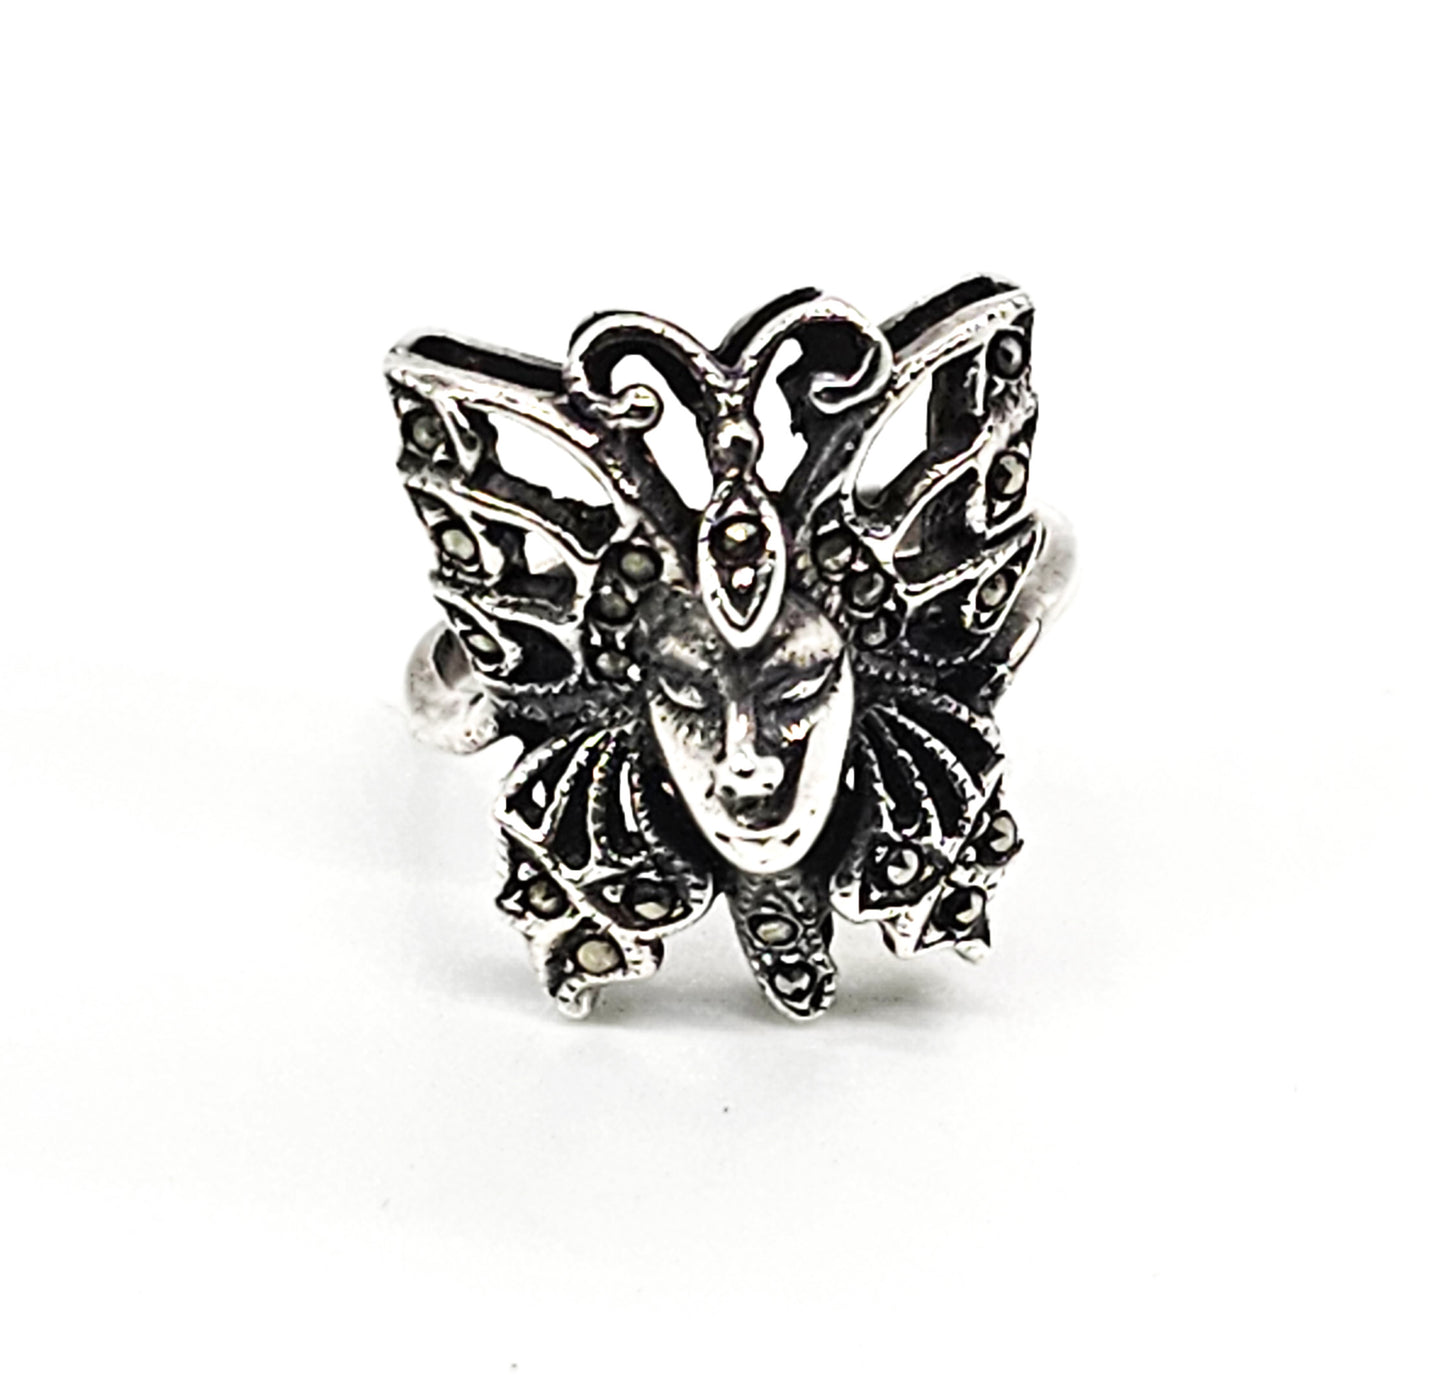 Butterfly Fairy Queen Nymph marcasite sterling silver vintage ring size 5.5